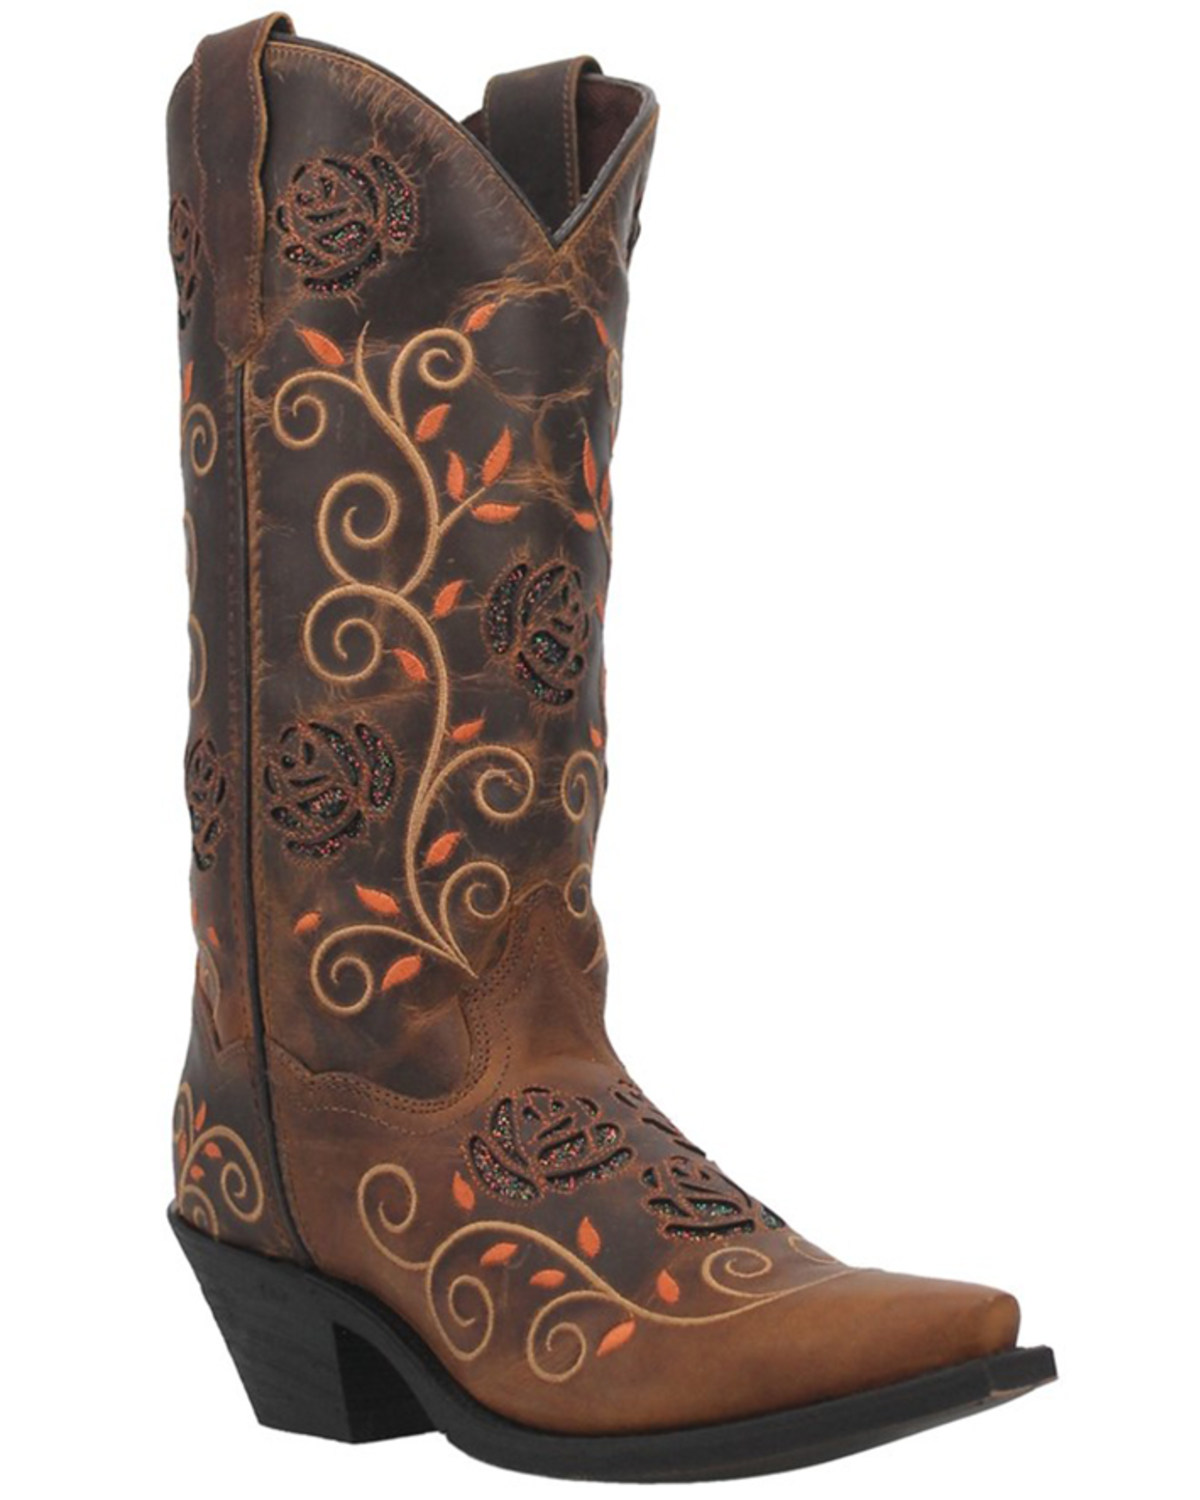 Laredo Women's Embroidered Leaf Western Performance Boots - Snip Toe